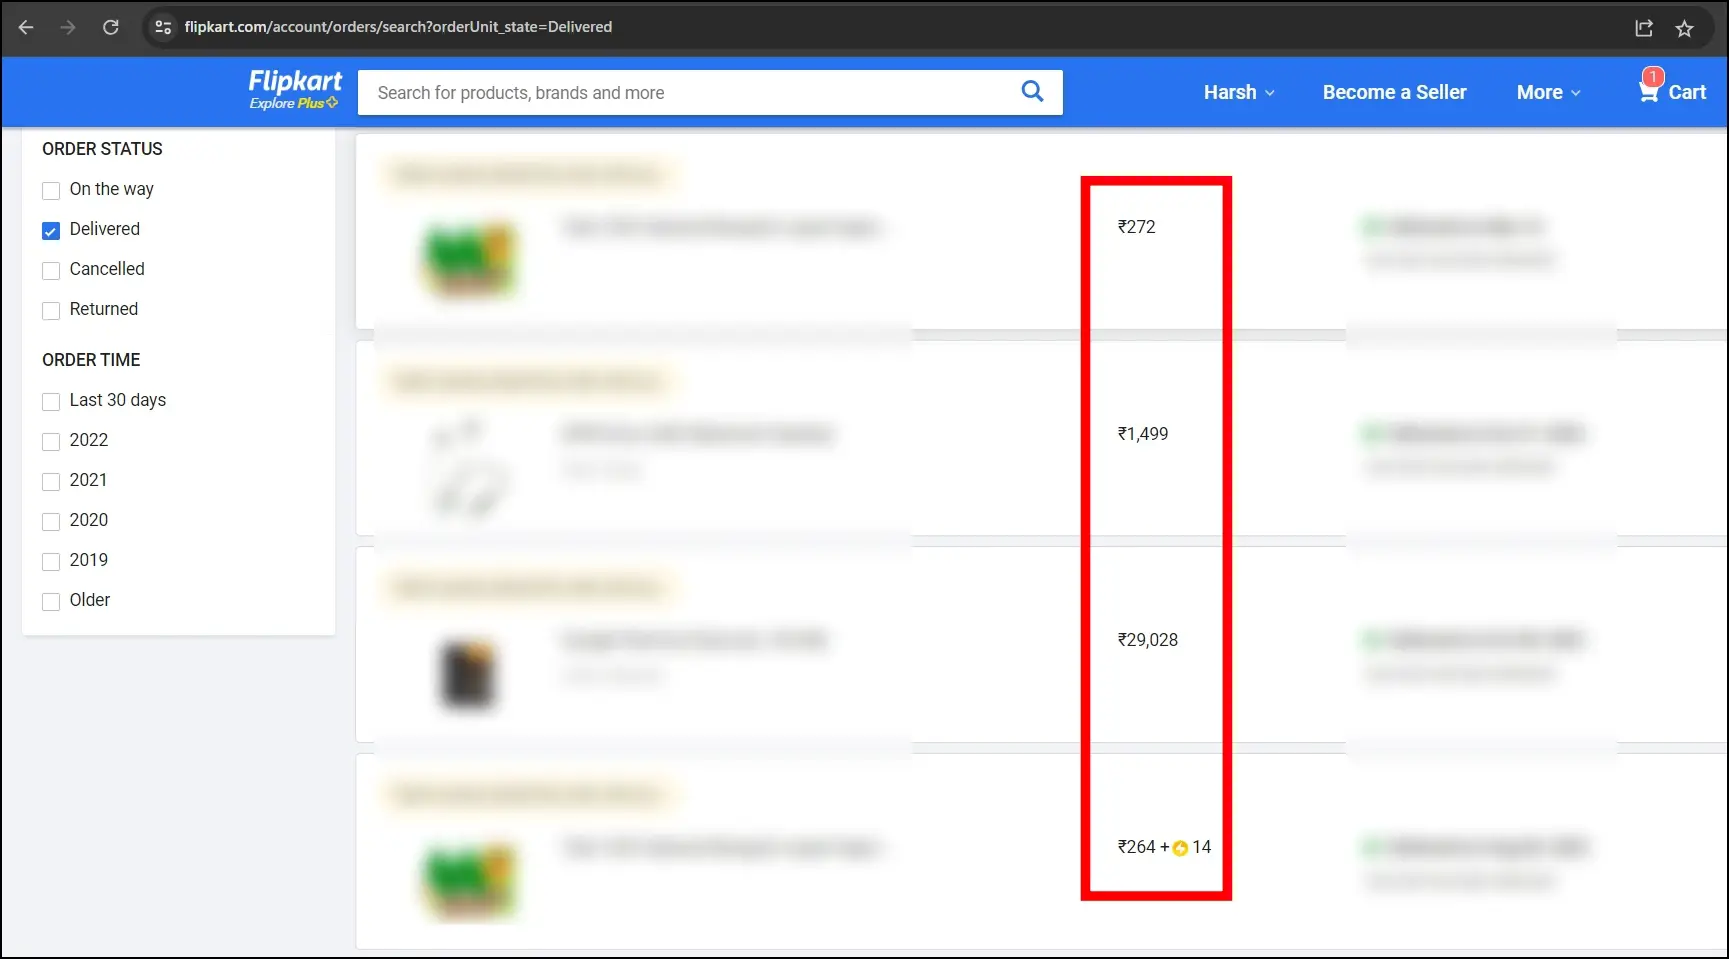 Manually Calculate Your Expense to Check Total Amount Spent on Flipkart